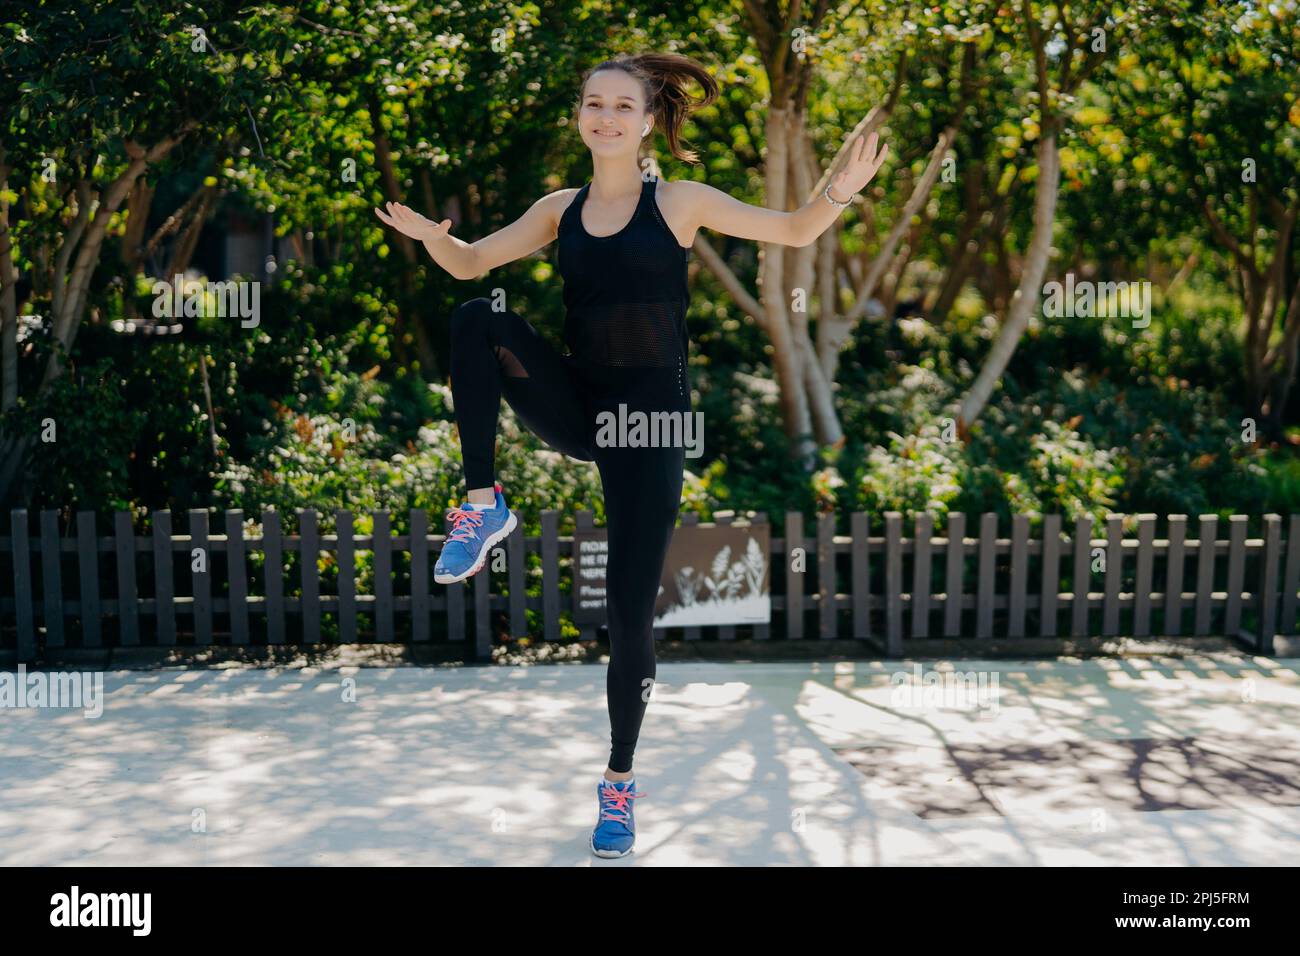 Outdoor shot of athletic motivated woman jumps high does physical exercises keeps hands and legs raised dressed in black sport clothes being in good m Stock Photo